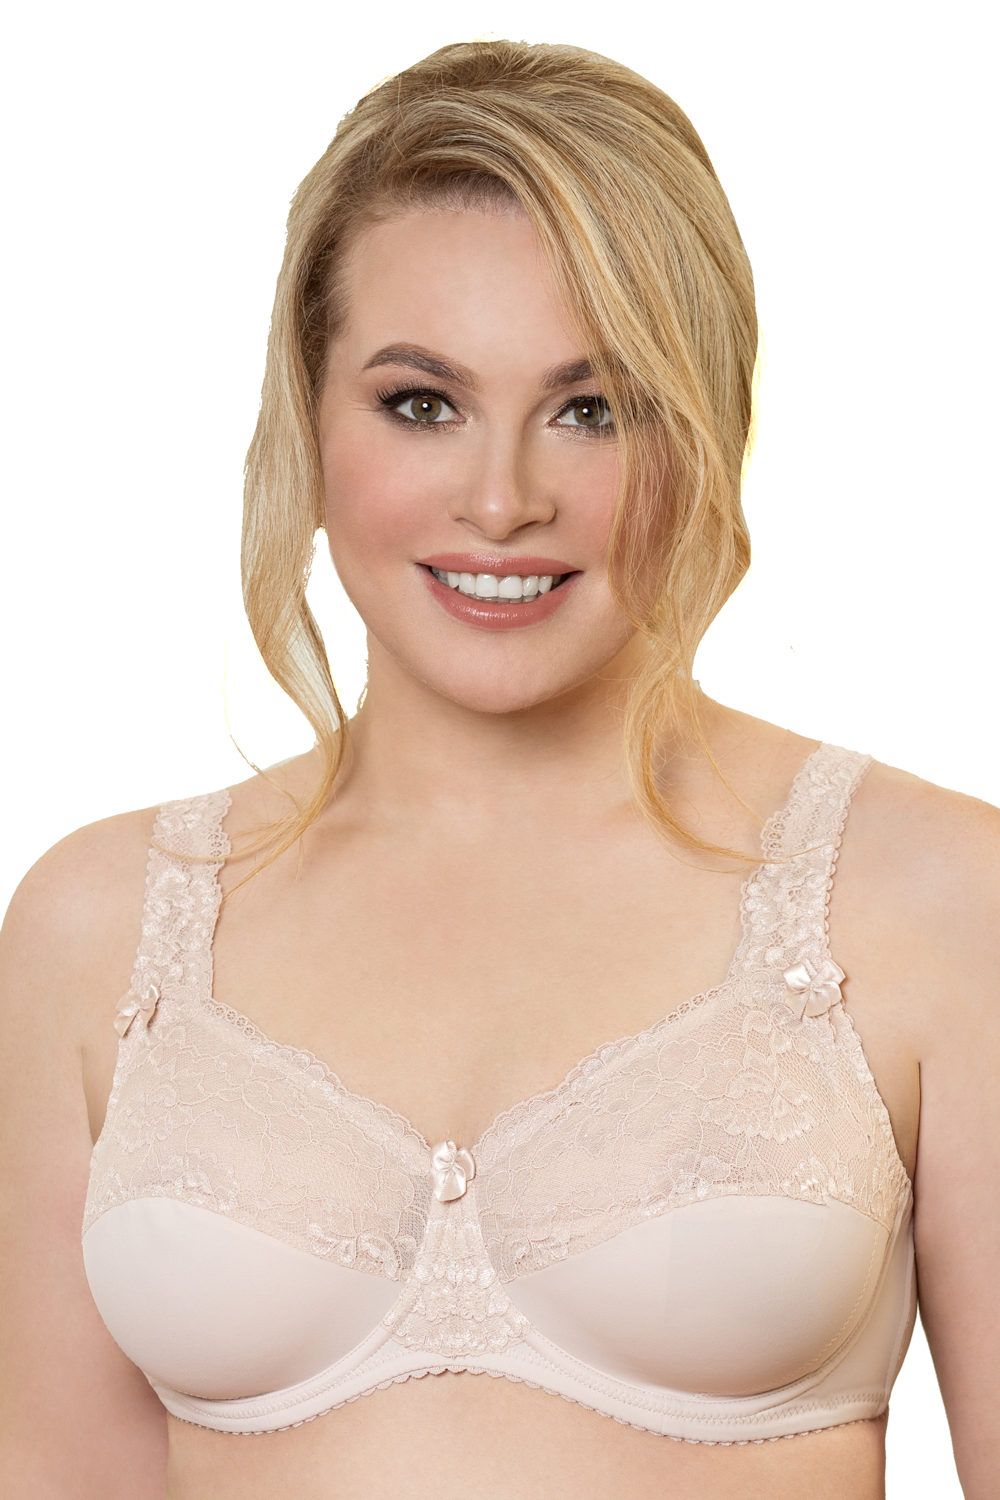 Plaisir Beate Lux Full Cup Bra Petal Pink  Lumingerie bras and underwear  for big busts